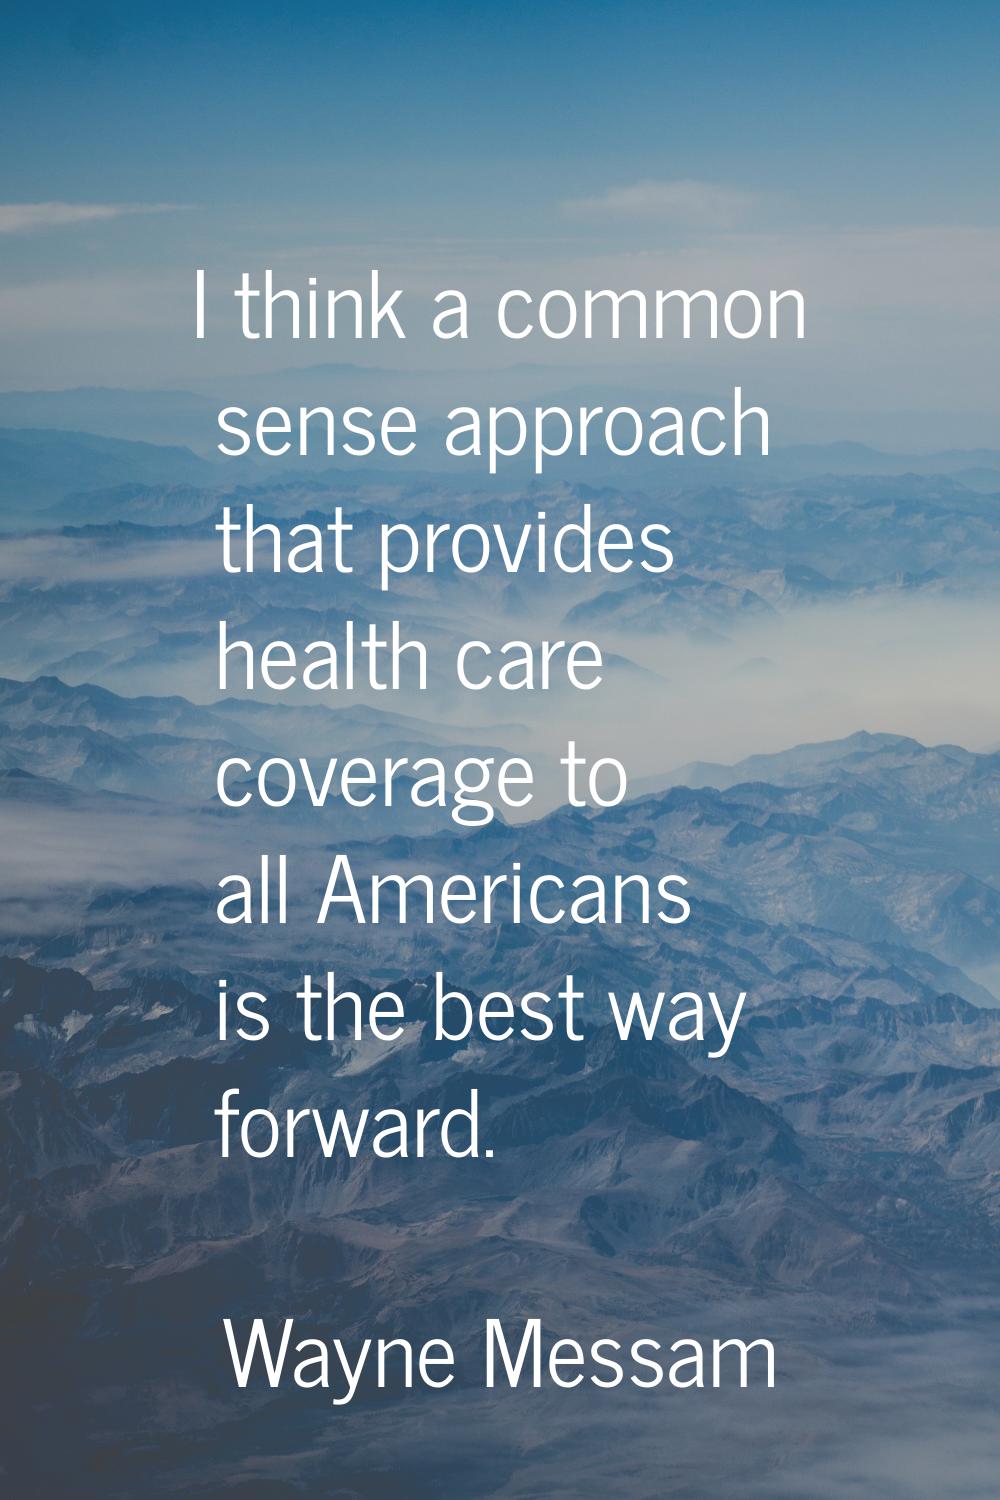 I think a common sense approach that provides health care coverage to all Americans is the best way